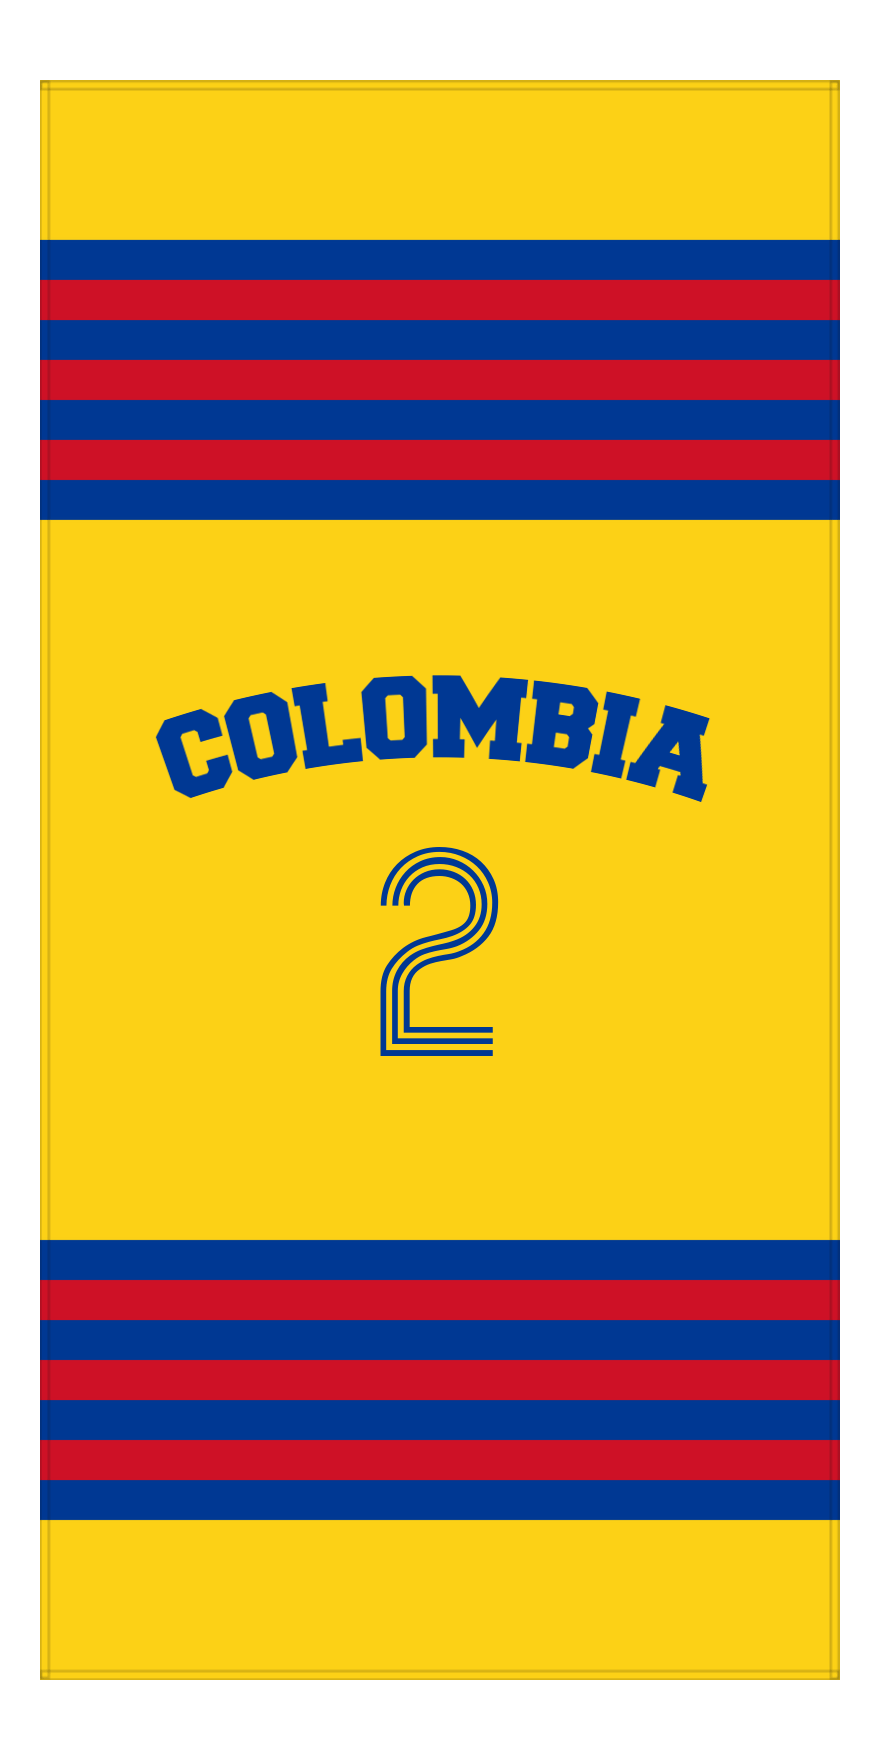 Personalized Jersey Number 3-on-1 Stripes Sports Beach Towel with Arched Name - Colombia - Vertical Design - Front View